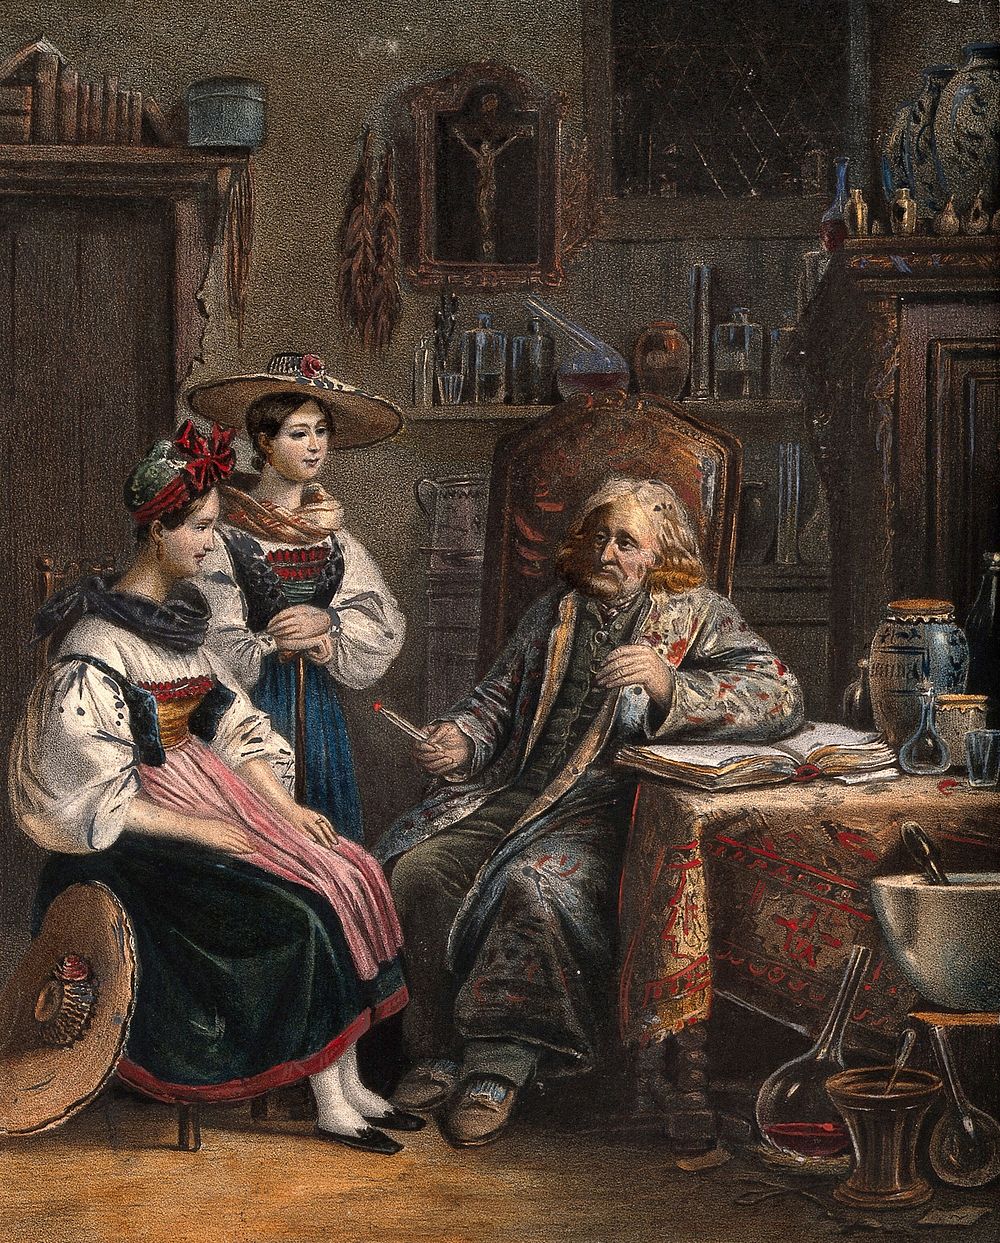 A lady, with her maid, consults an apothecary in his workroom, for a love philtre . Coloured lithograph, c.1850.